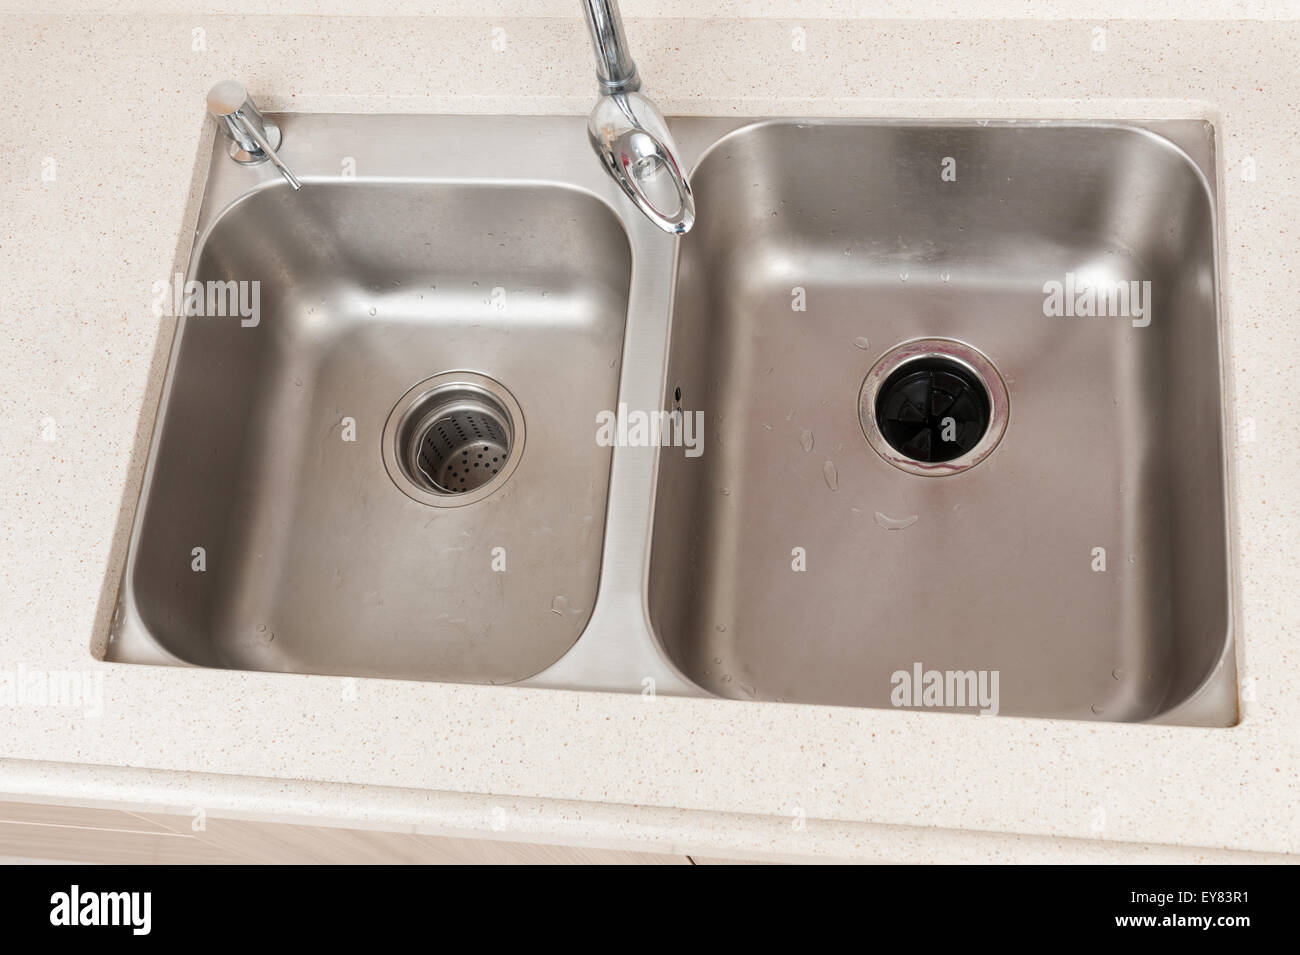 a double bowl stainless steel sink on kitchen counter Stock Photo